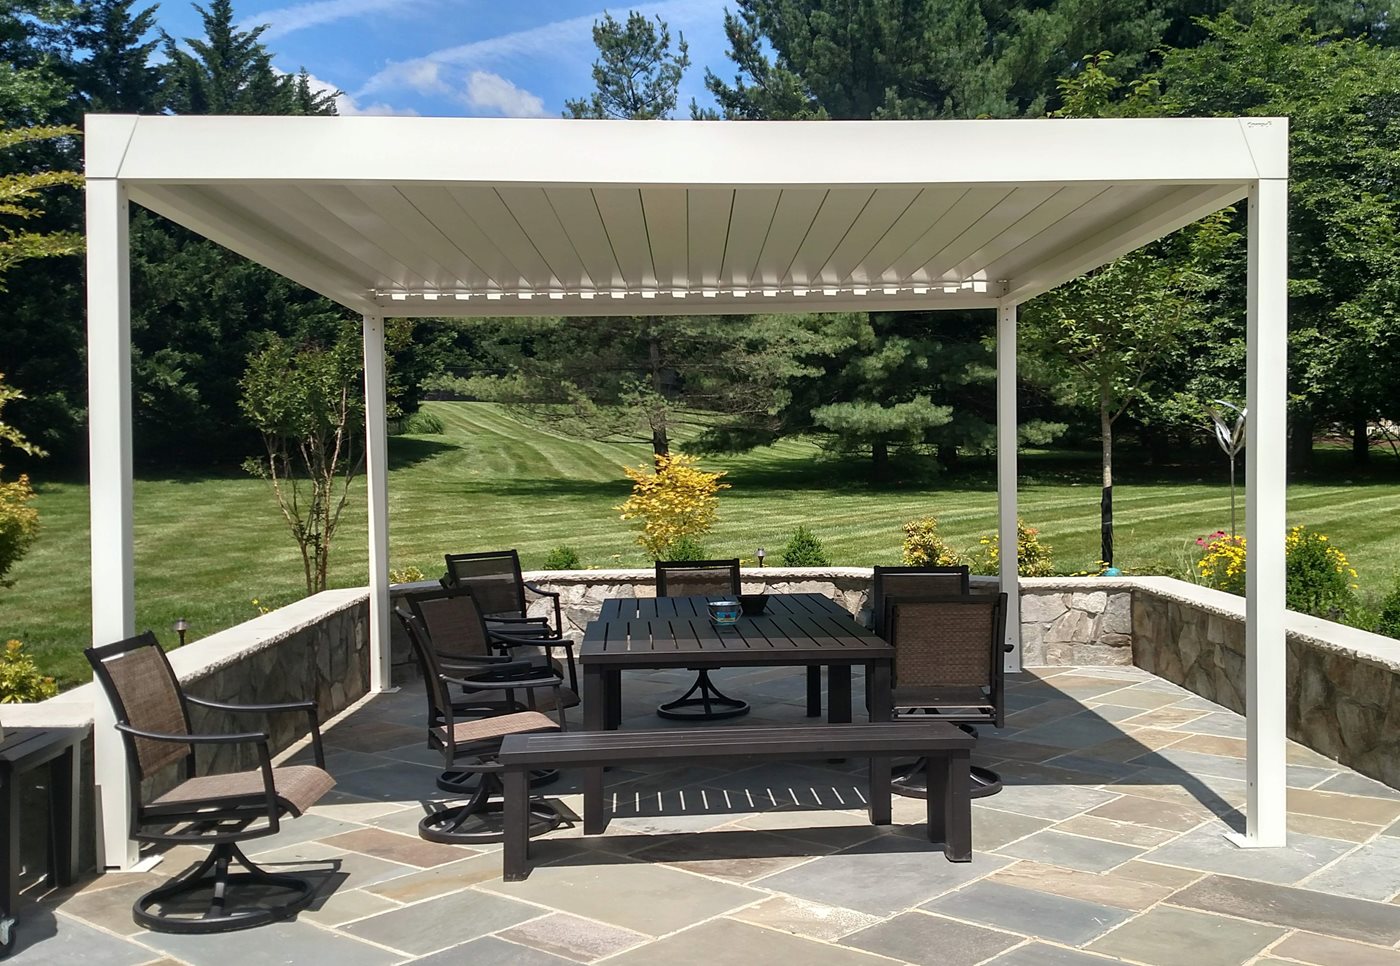 Freestanding-Alba-at-Maryland-Residence-by-The-Deck-Awning-Co-(4).jpg